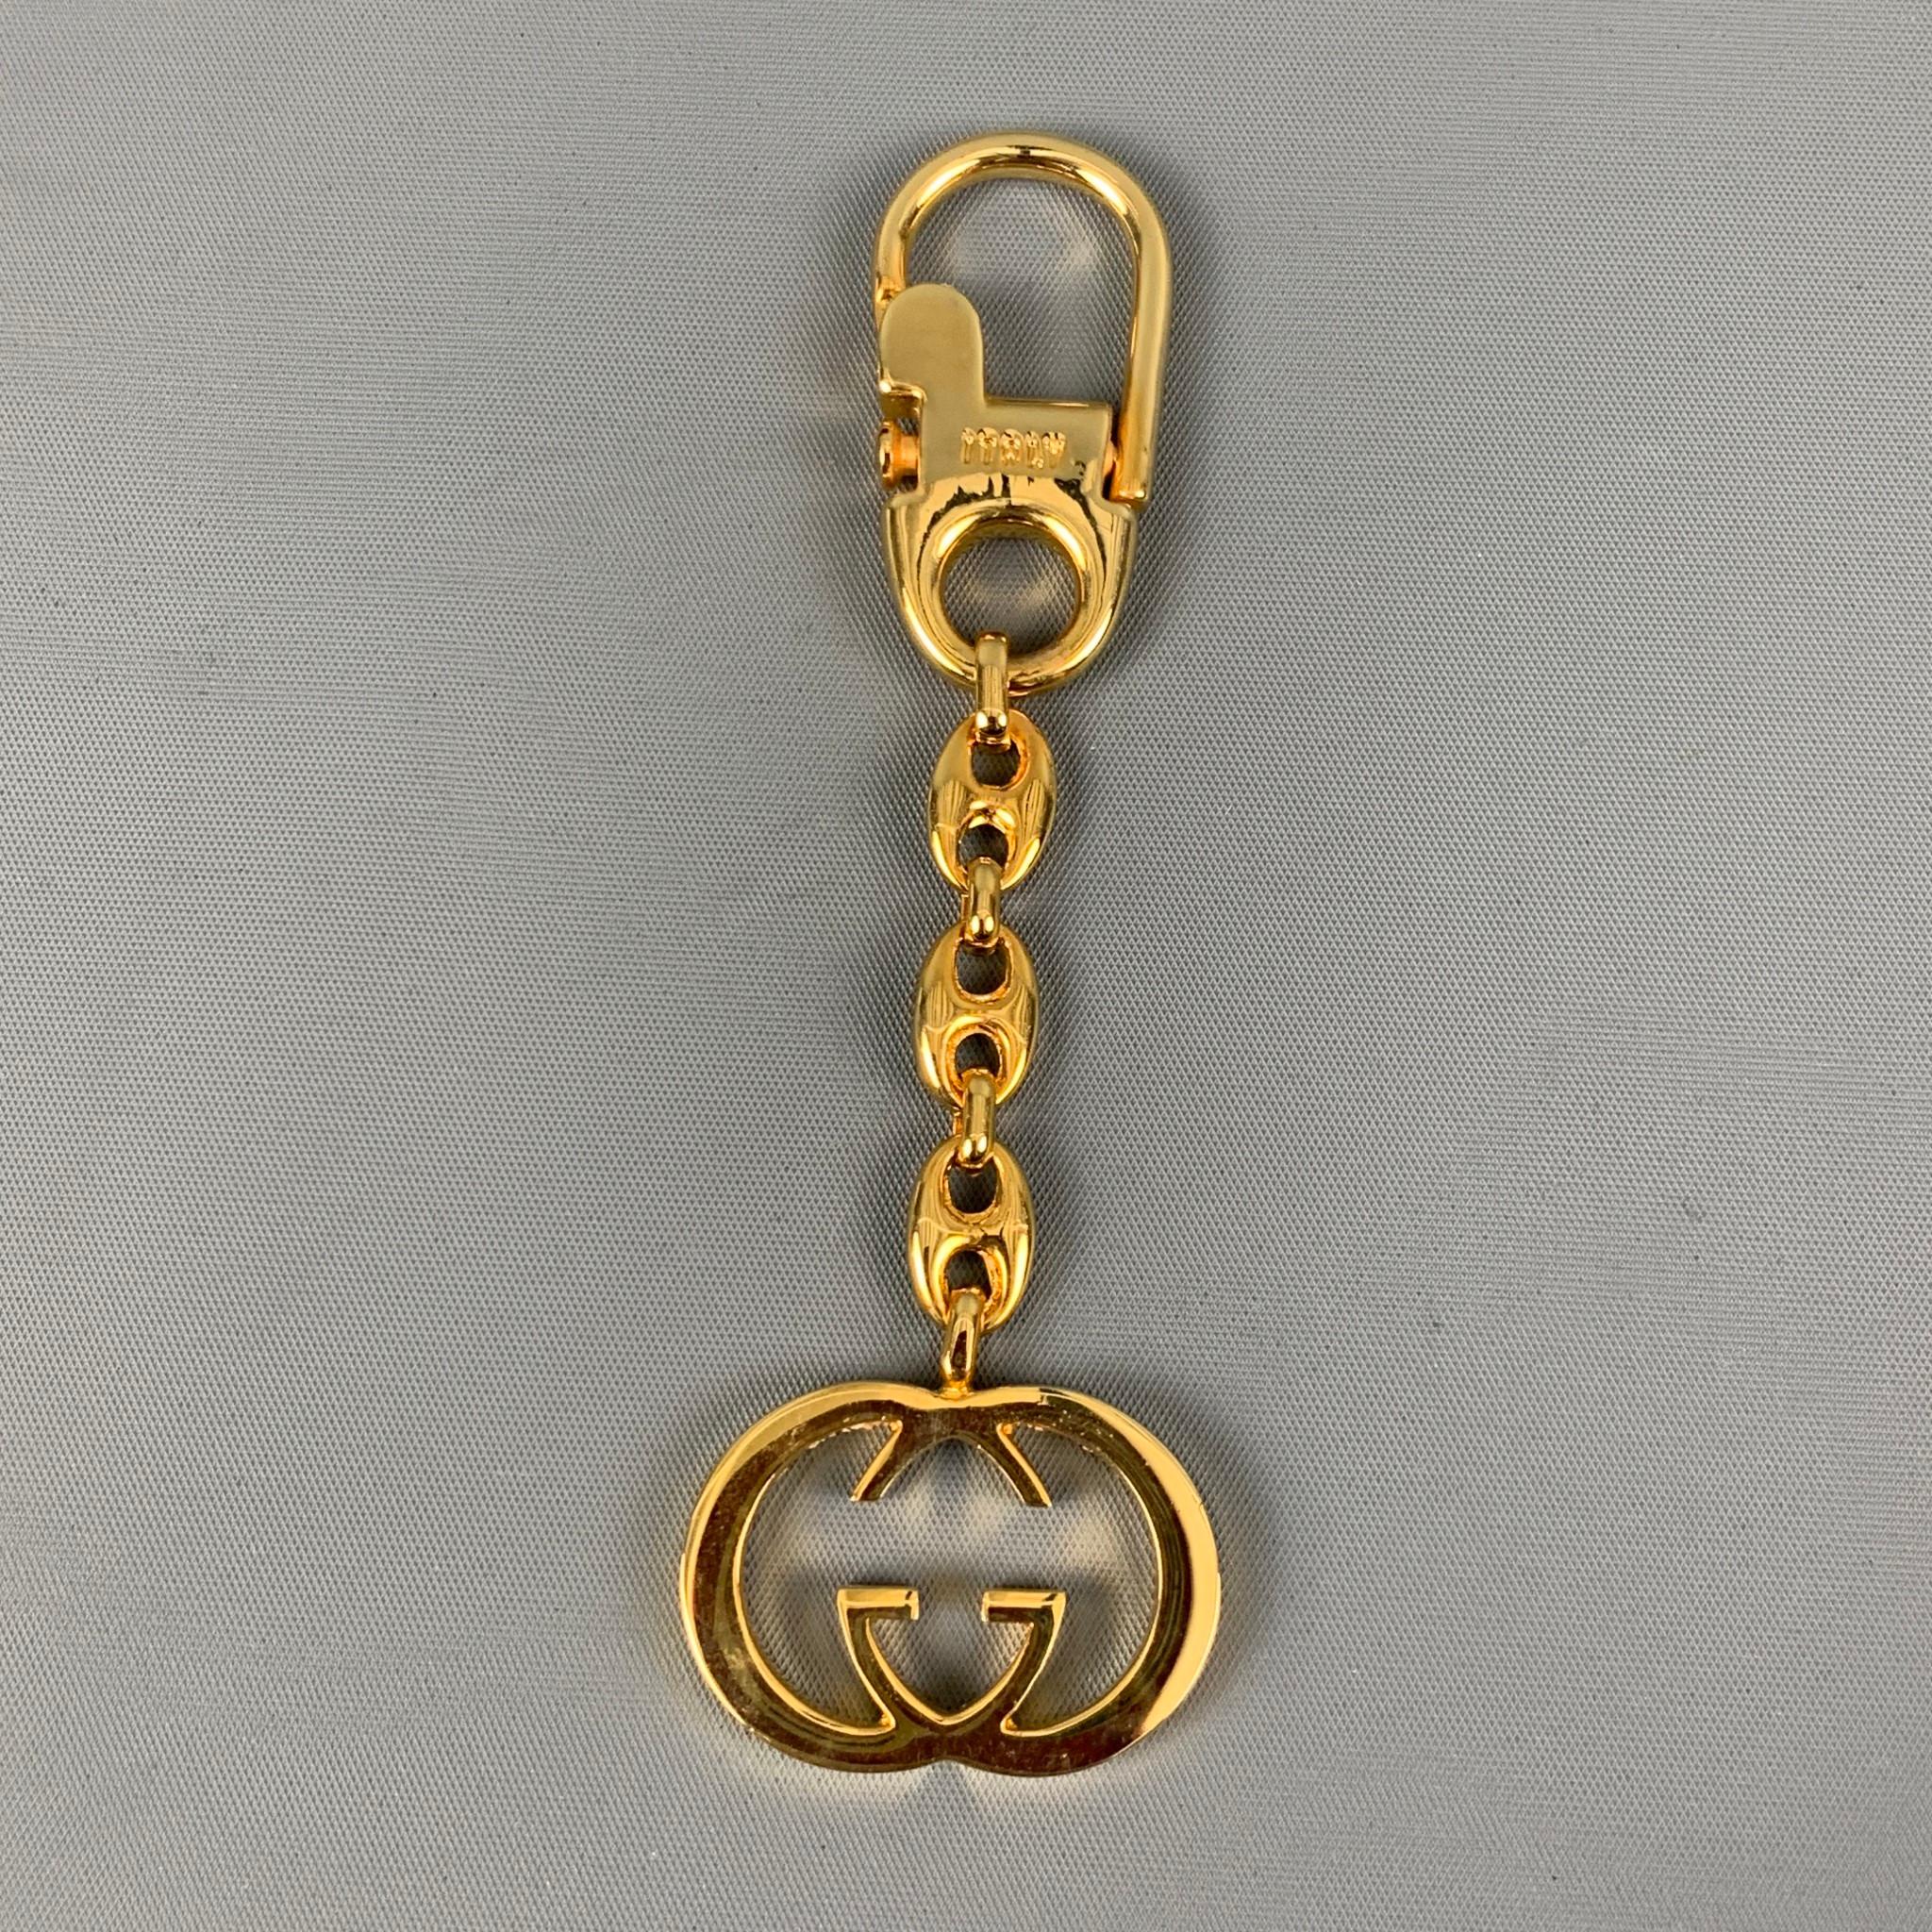 Vintage GUCCI interlocking GG key chain comes in a gold metal material. Comes with the Box.

Very Good Pre-Owned Condition.

Measurements:

Length: 5 in. 

SKU: 124428
Category: Bags & Leather Goods

More Details
Brand: GUCCI
Color: Gold
Pattern: